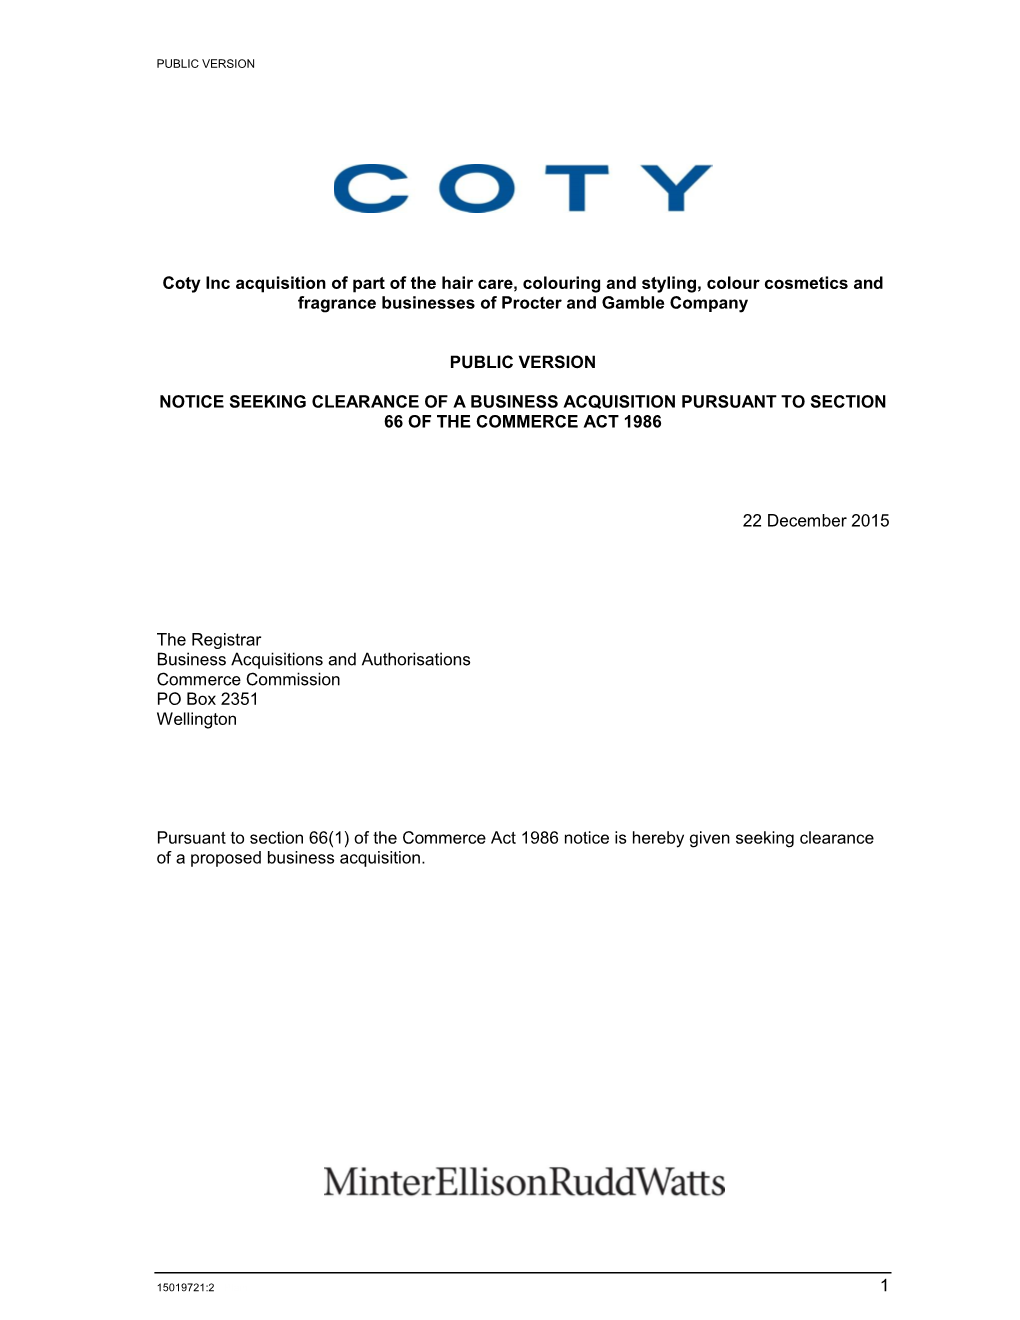 1 Coty Inc Acquisition of Part of the Hair Care, Colouring and Styling